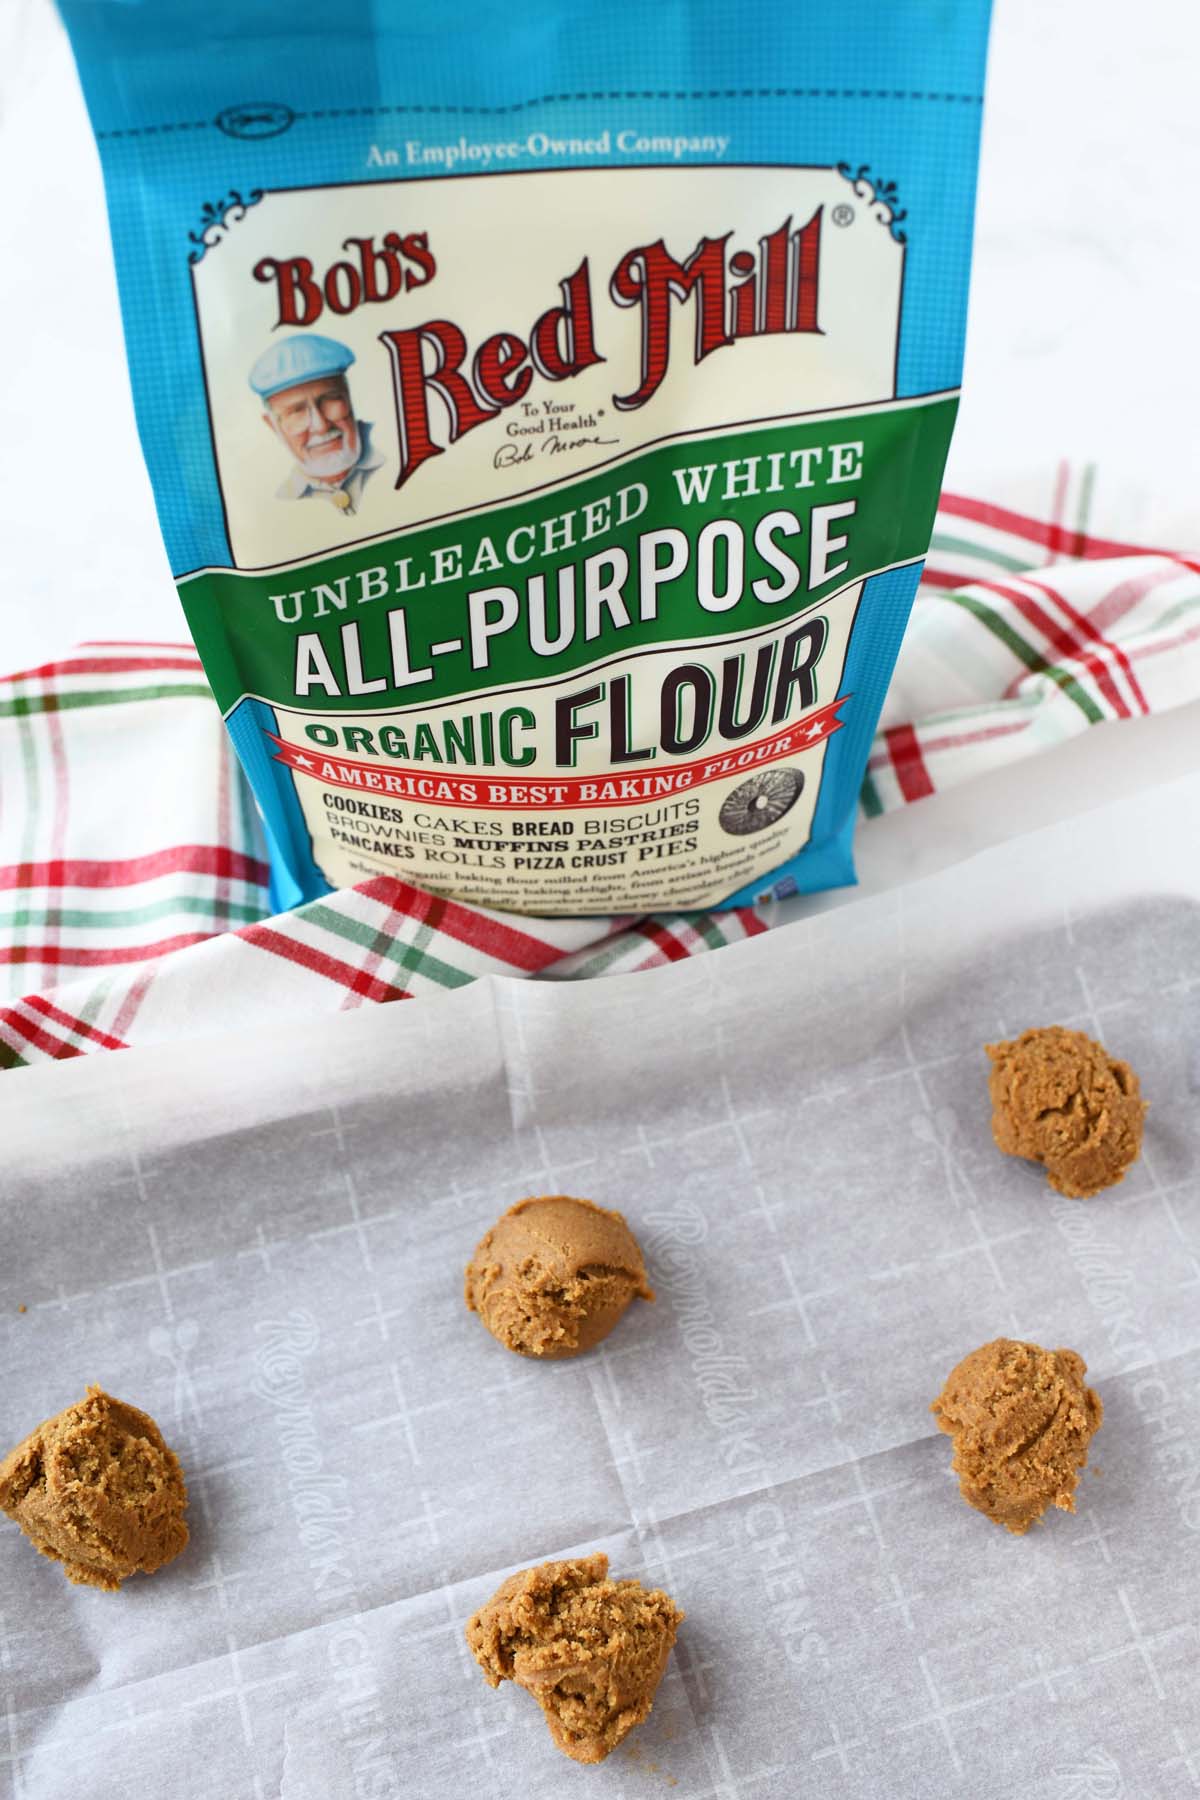 Bobs red mill organic flour with unbaked cookie dough balls on a baking sheet.